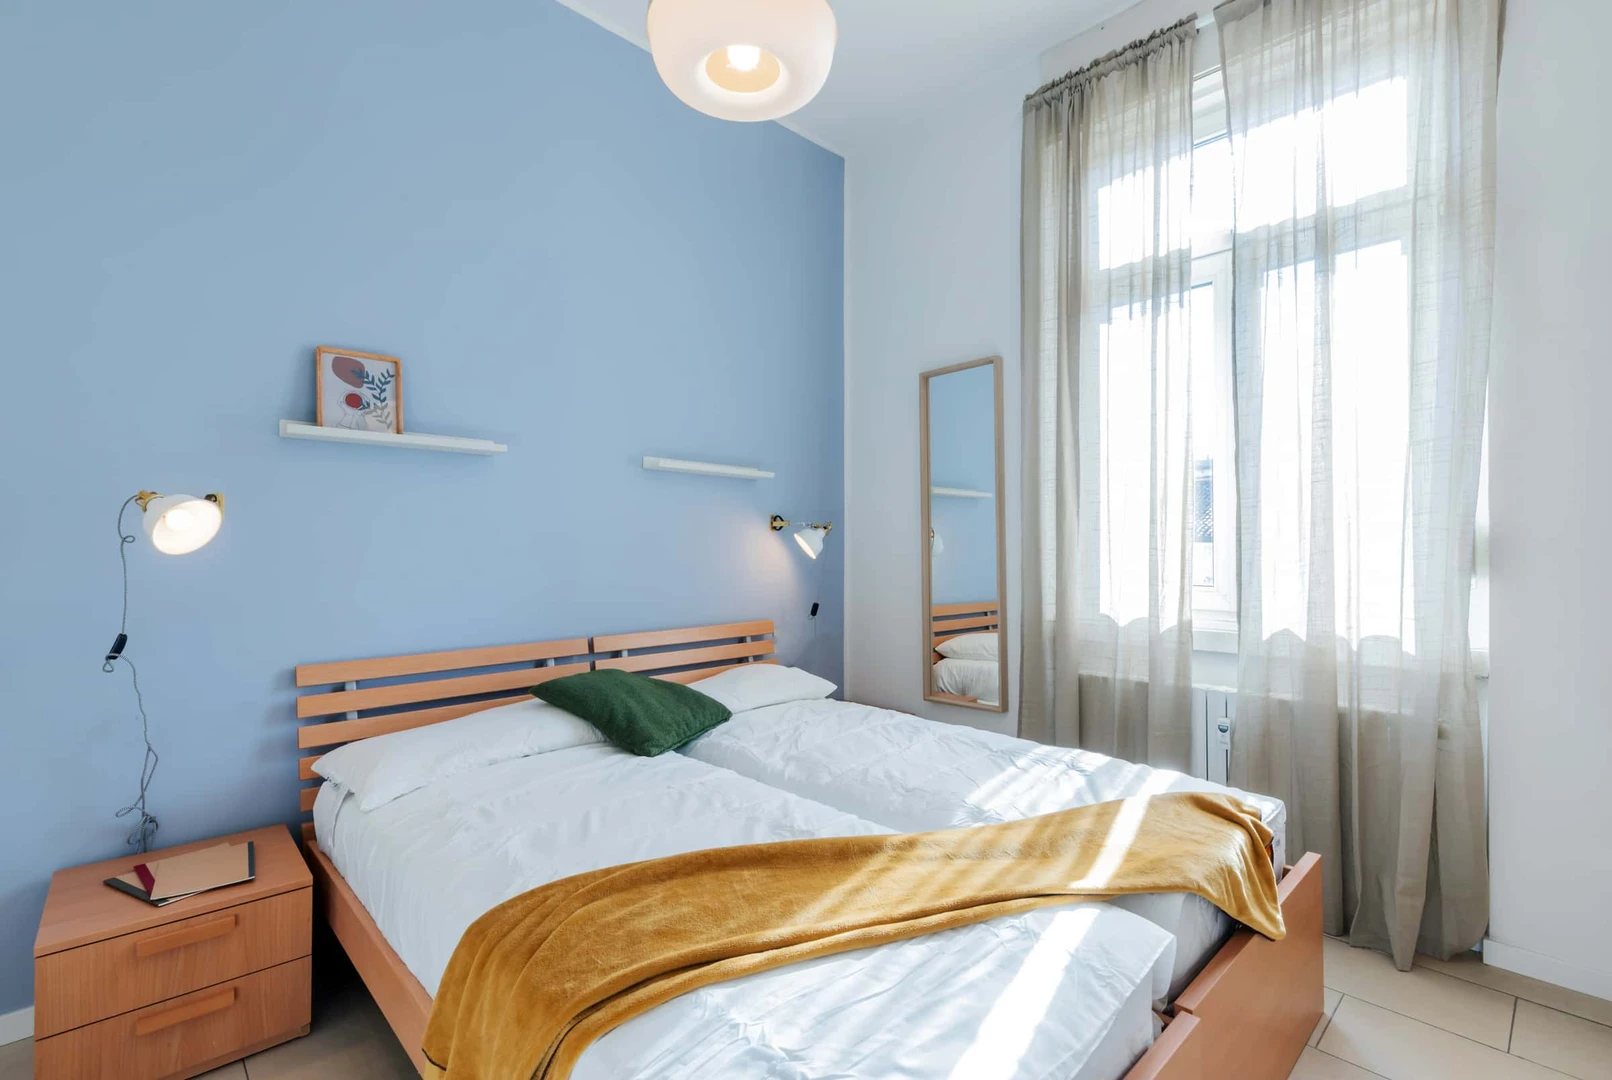 Room for rent with double bed trieste